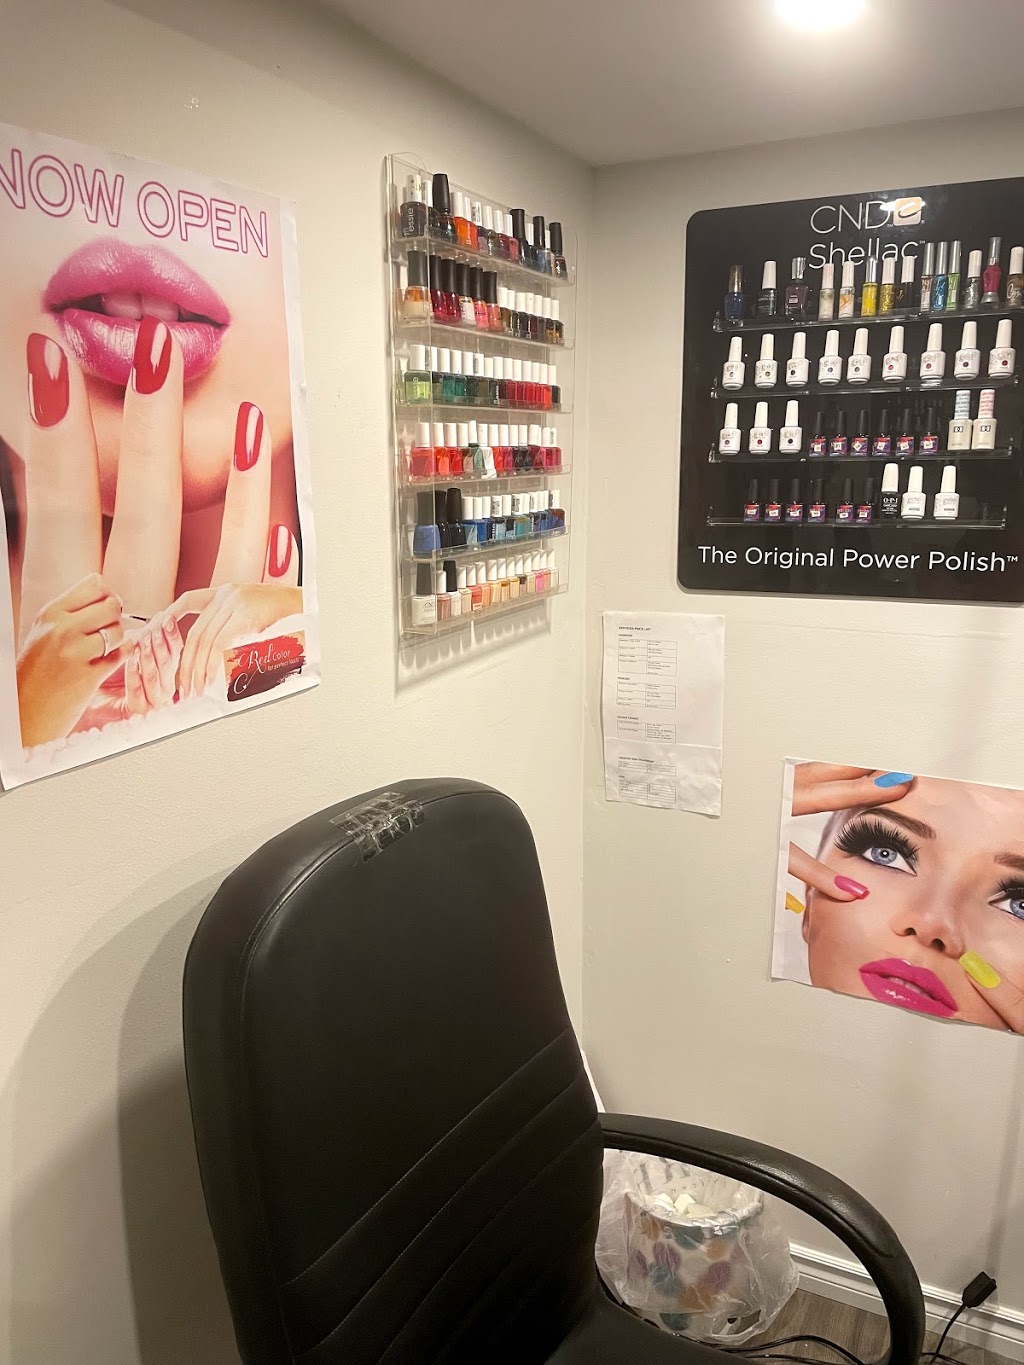 SPH Luxurious Mani and Pedi | 160 McBride Ave, Bowmanville, ON L1C 0J4, Canada | Phone: (437) 929-1828